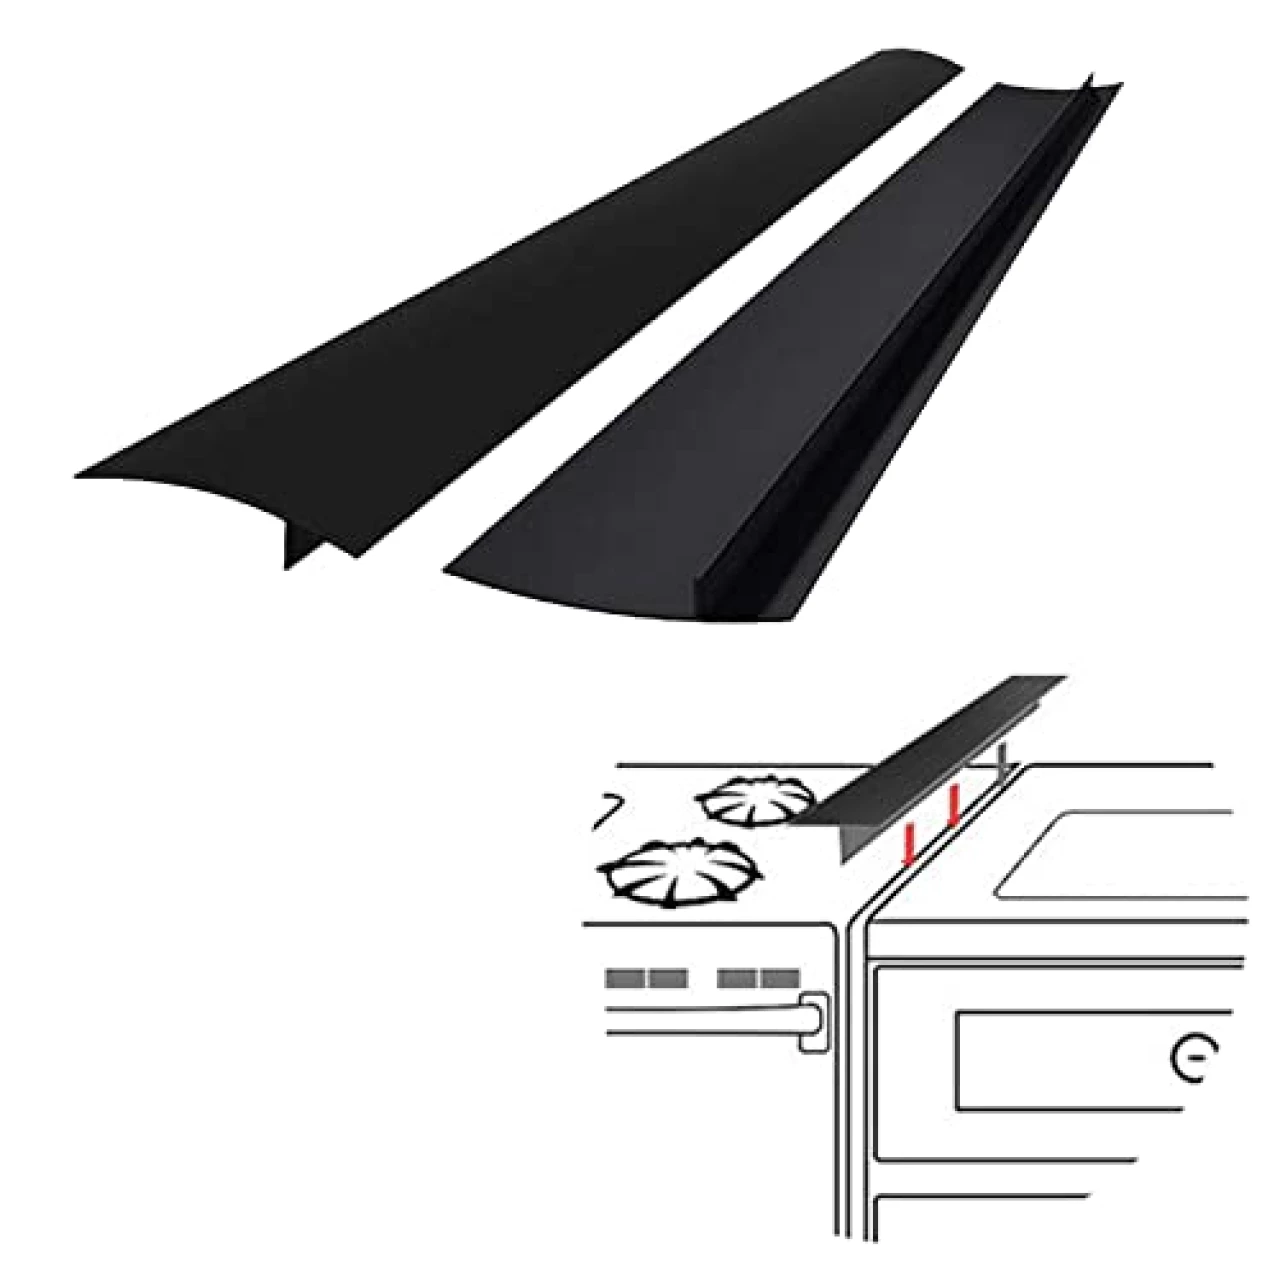 SEVCHY Silicone Stove Gap Covers (2 pack), Heat Resistant Stove Counter Guard Gap Filler